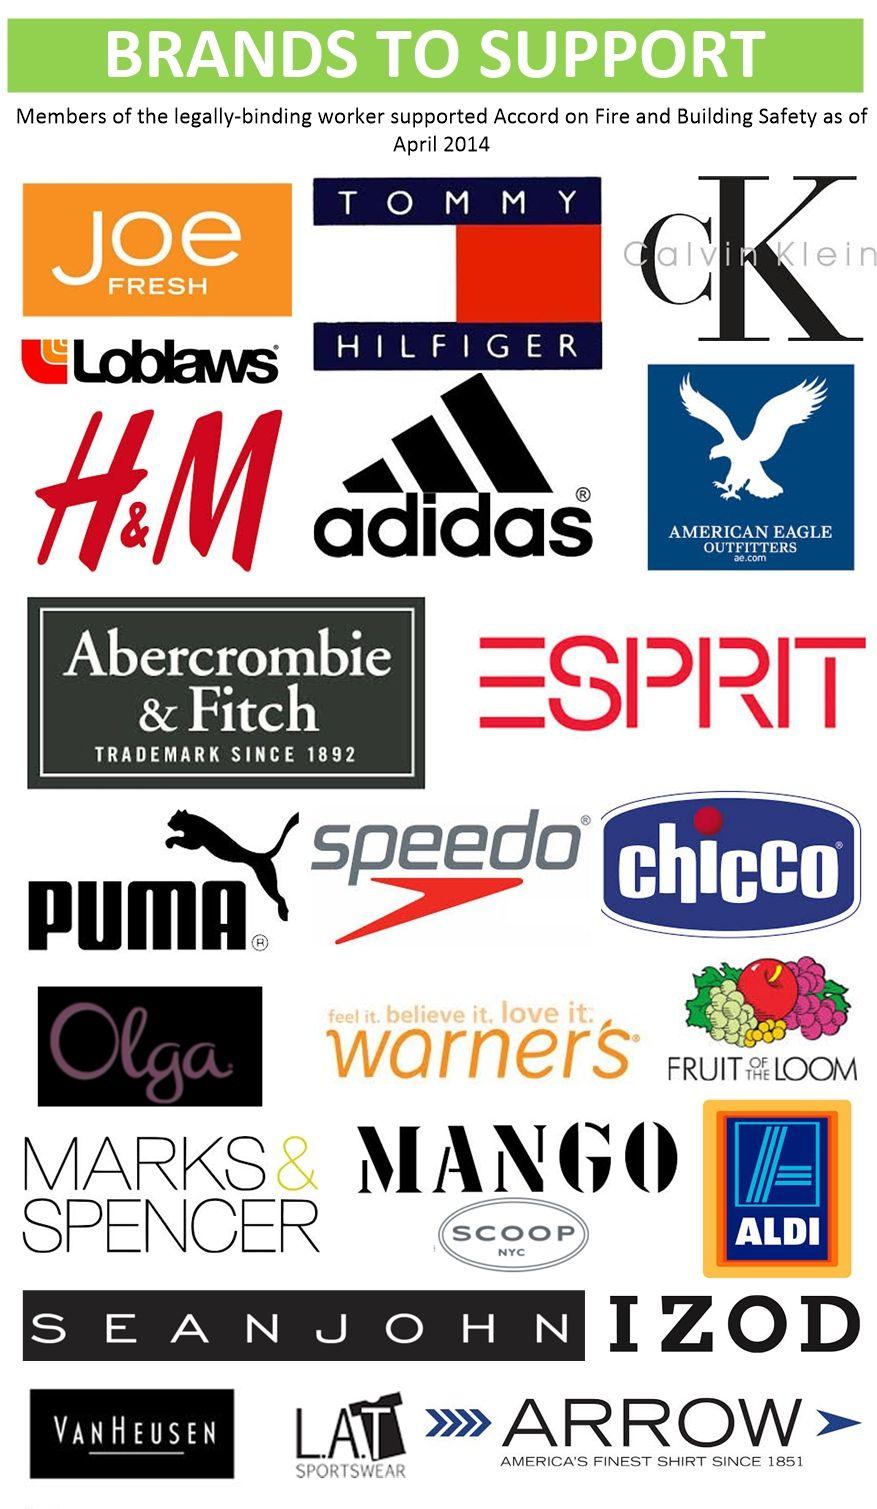 American Clothing Company Logo - 20 Best American Made Clothing Brands | HiConsumption